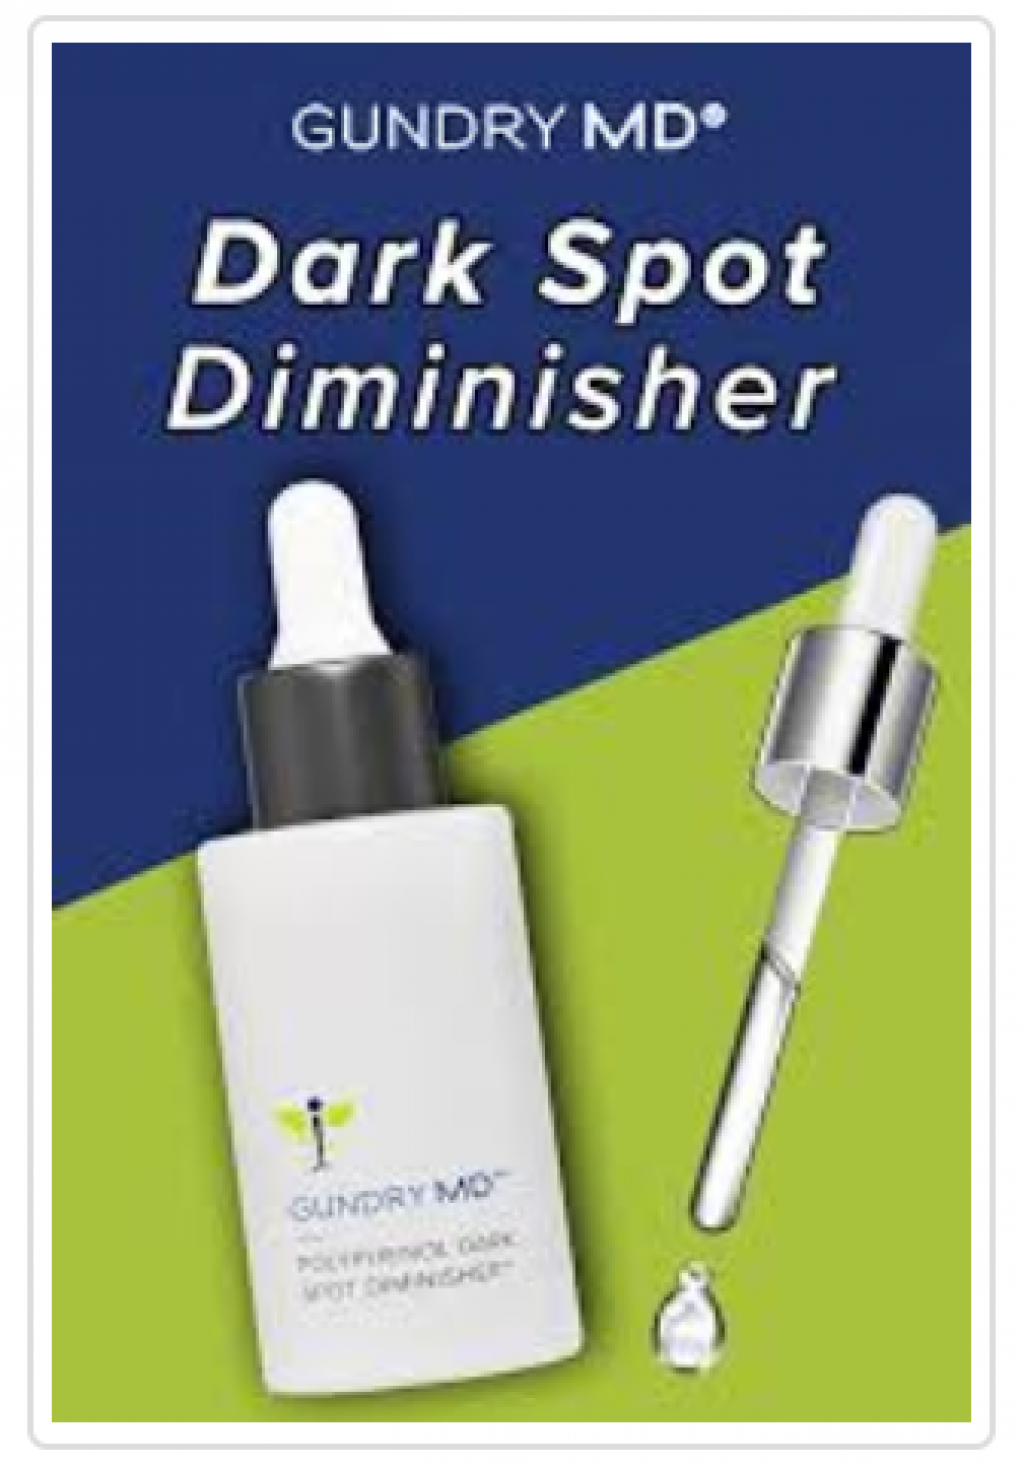 GUNDRY MD DARK SPOT DIMINISHER COUPON CODE UP TO 20 OFF!